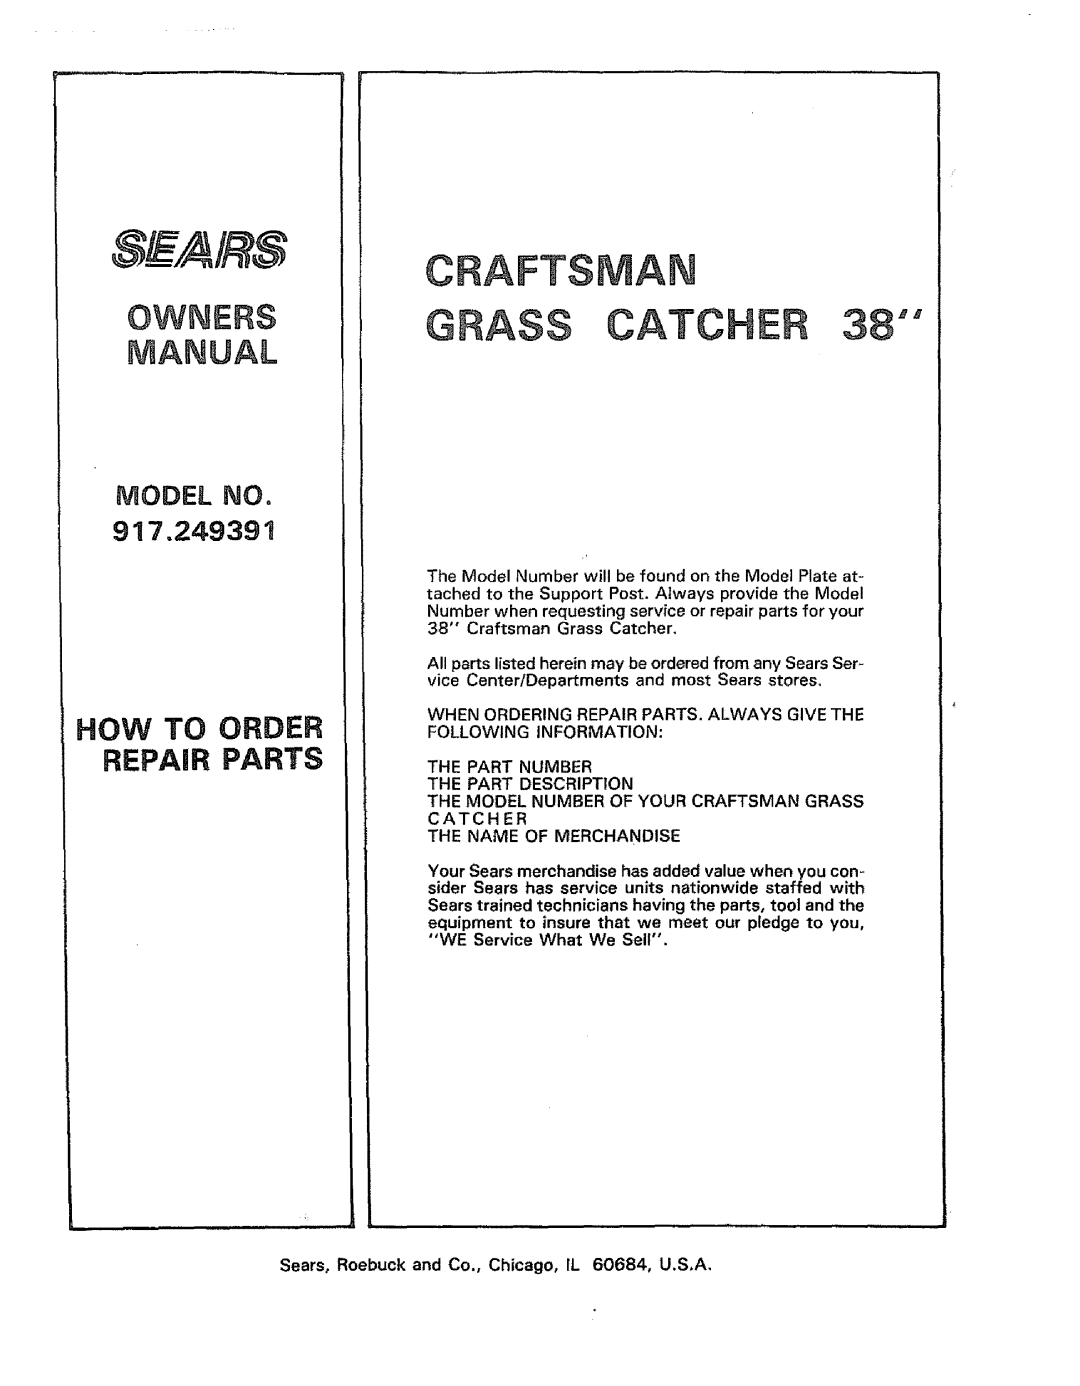 Sears 917.249391 manual Owners, Manual, Craftsman Grass Catch, How To Order Repair Parts 